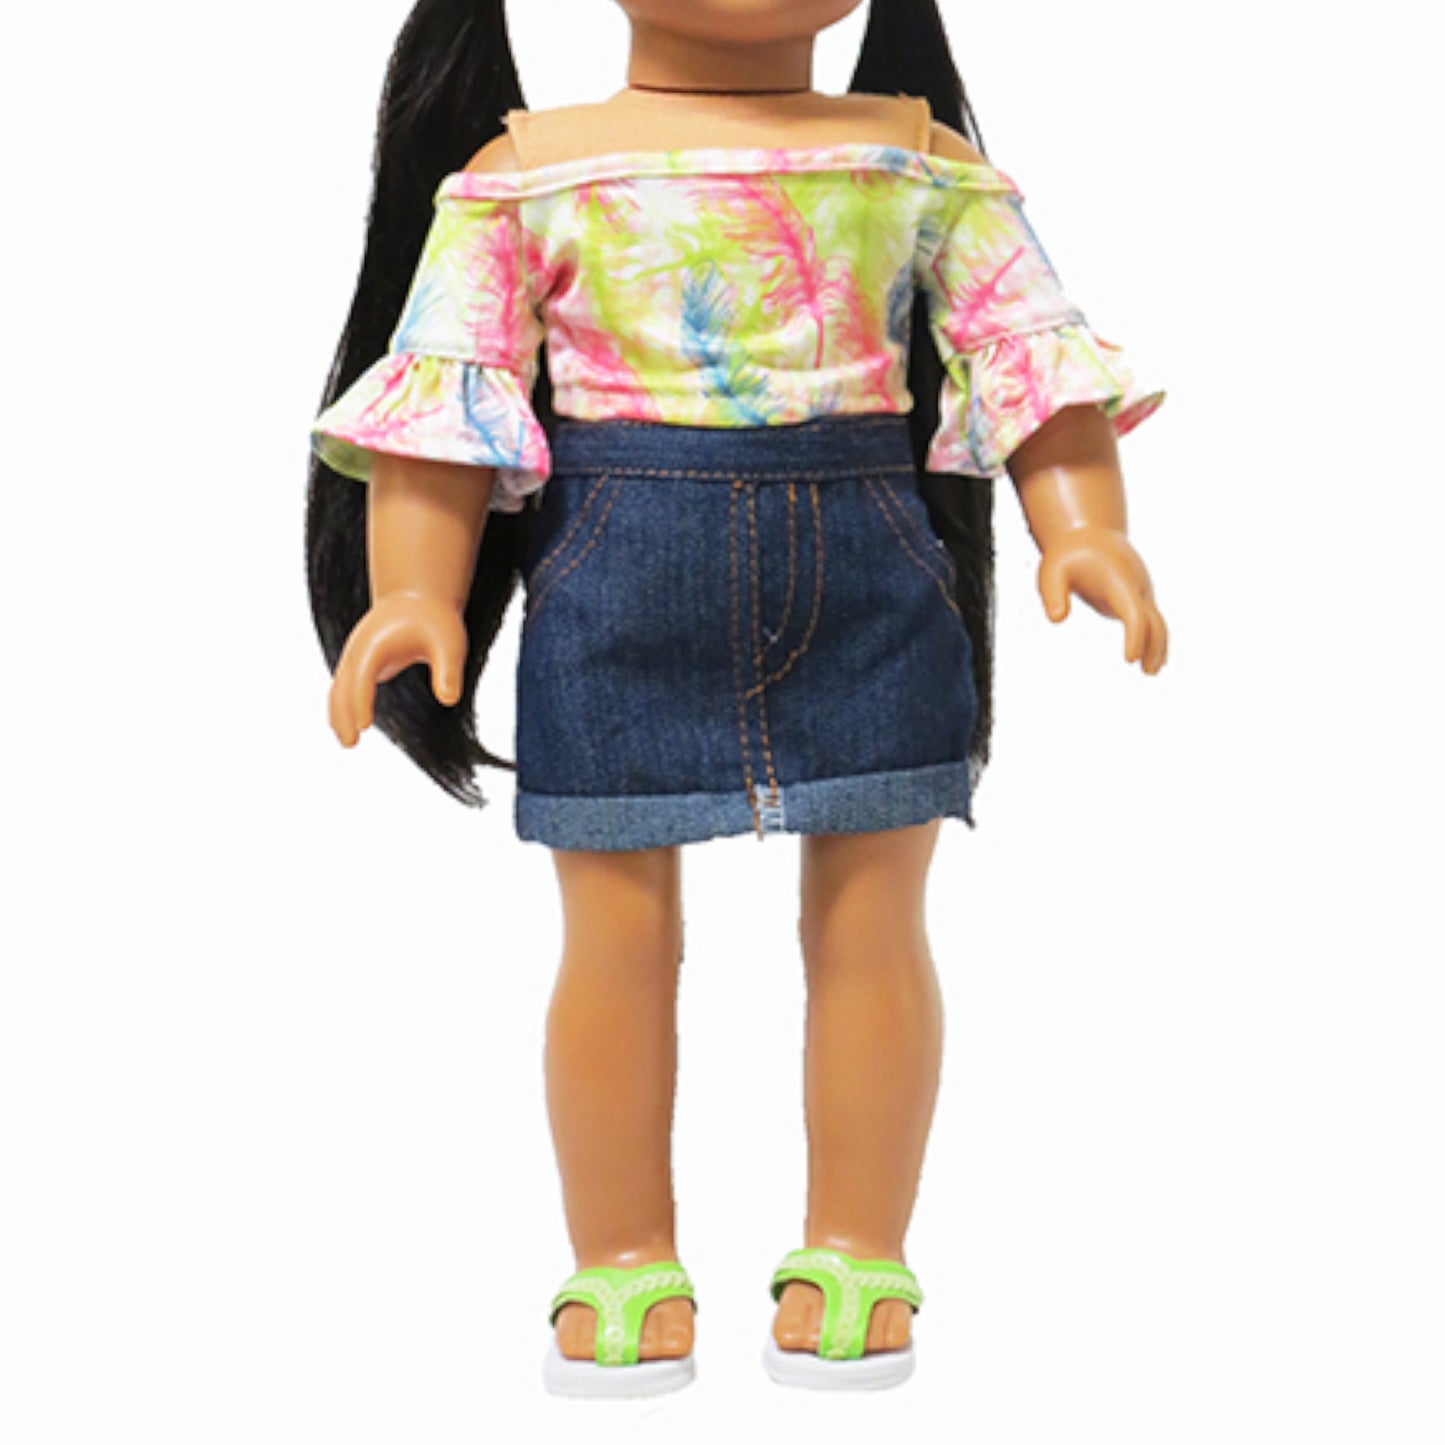 Tropical Outfit for 18-inch dolls with doll